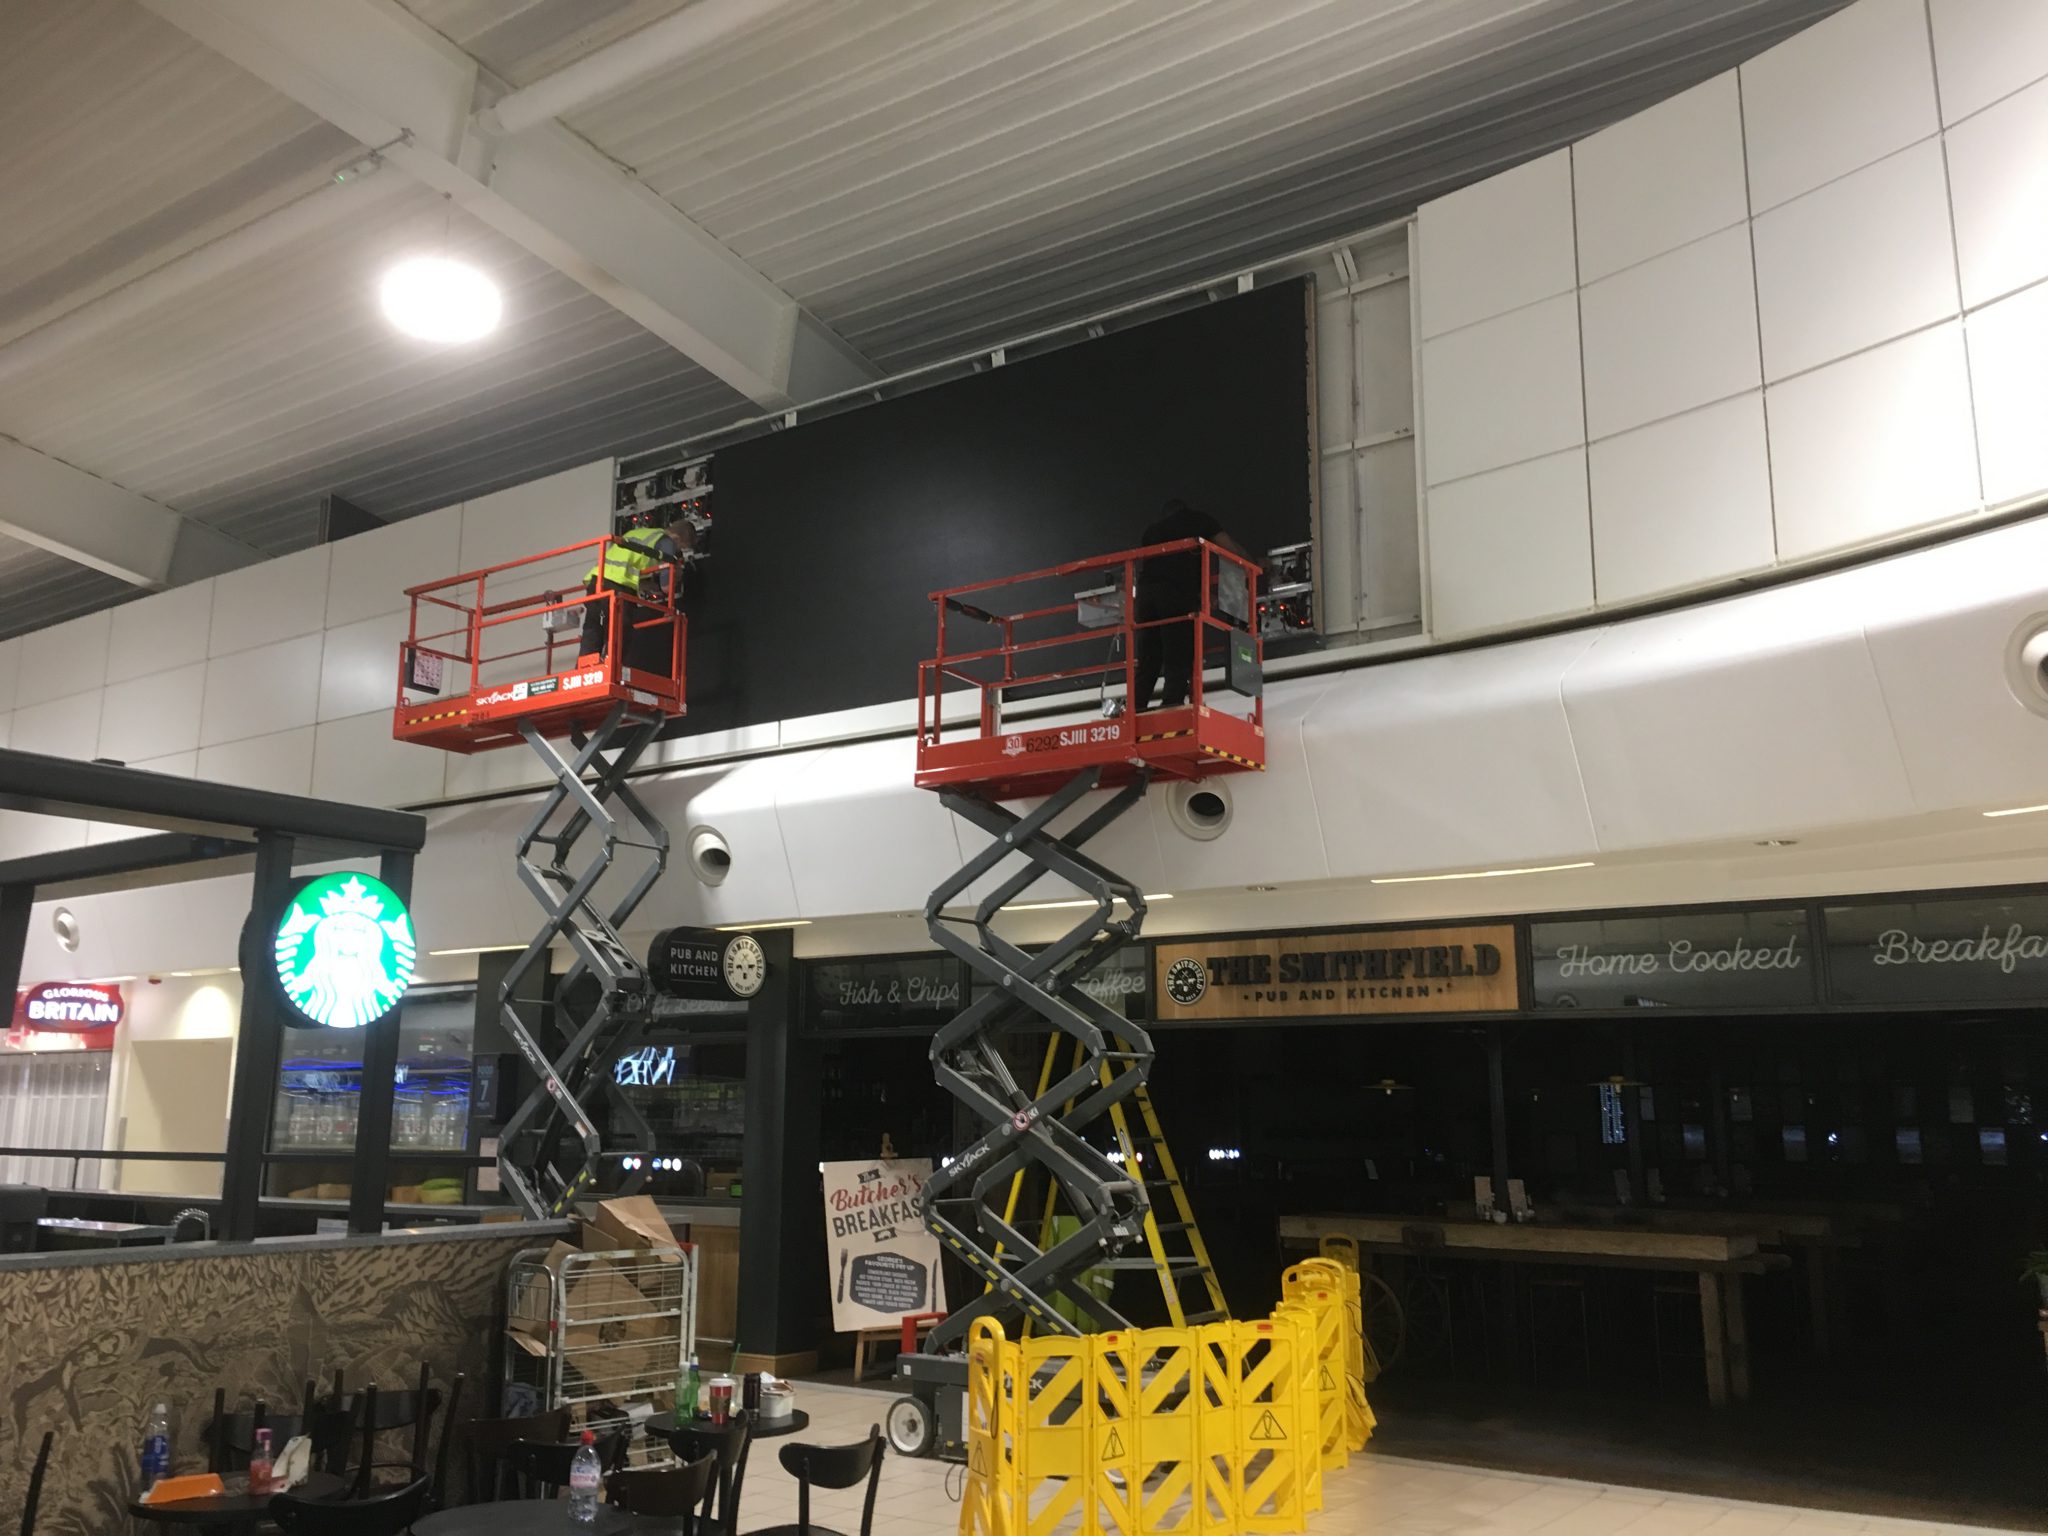 Health and Safety - LED Wall installation using scissor lifts at London Luton Airport